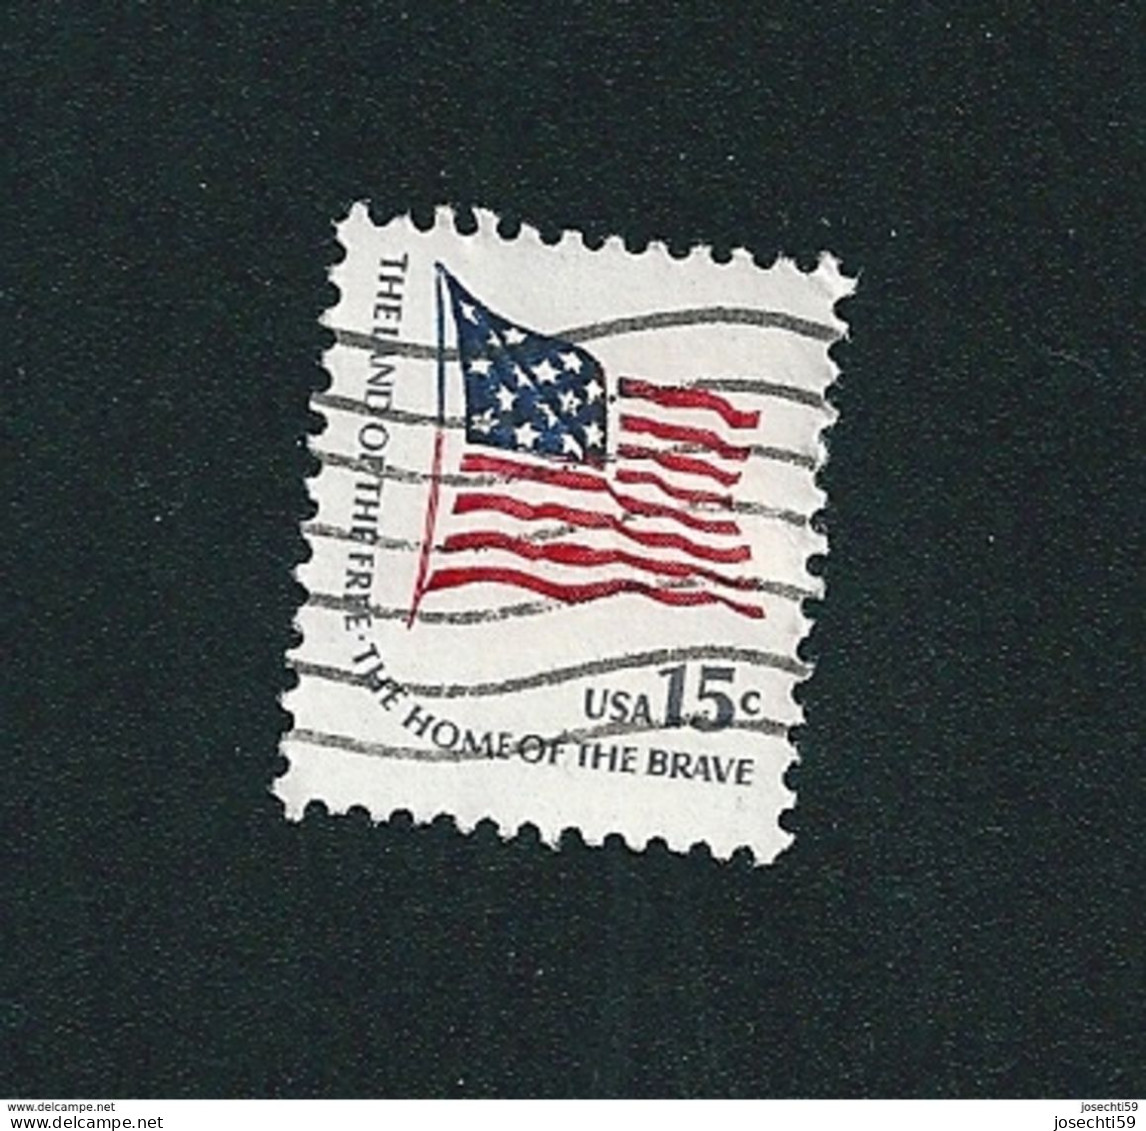 N° 1204 	 USA - The Land Of The Free, The Home Of The Brave 15c    Stamp Etats Unis D' Amérique  (1978)  Timbre USA - Gebraucht